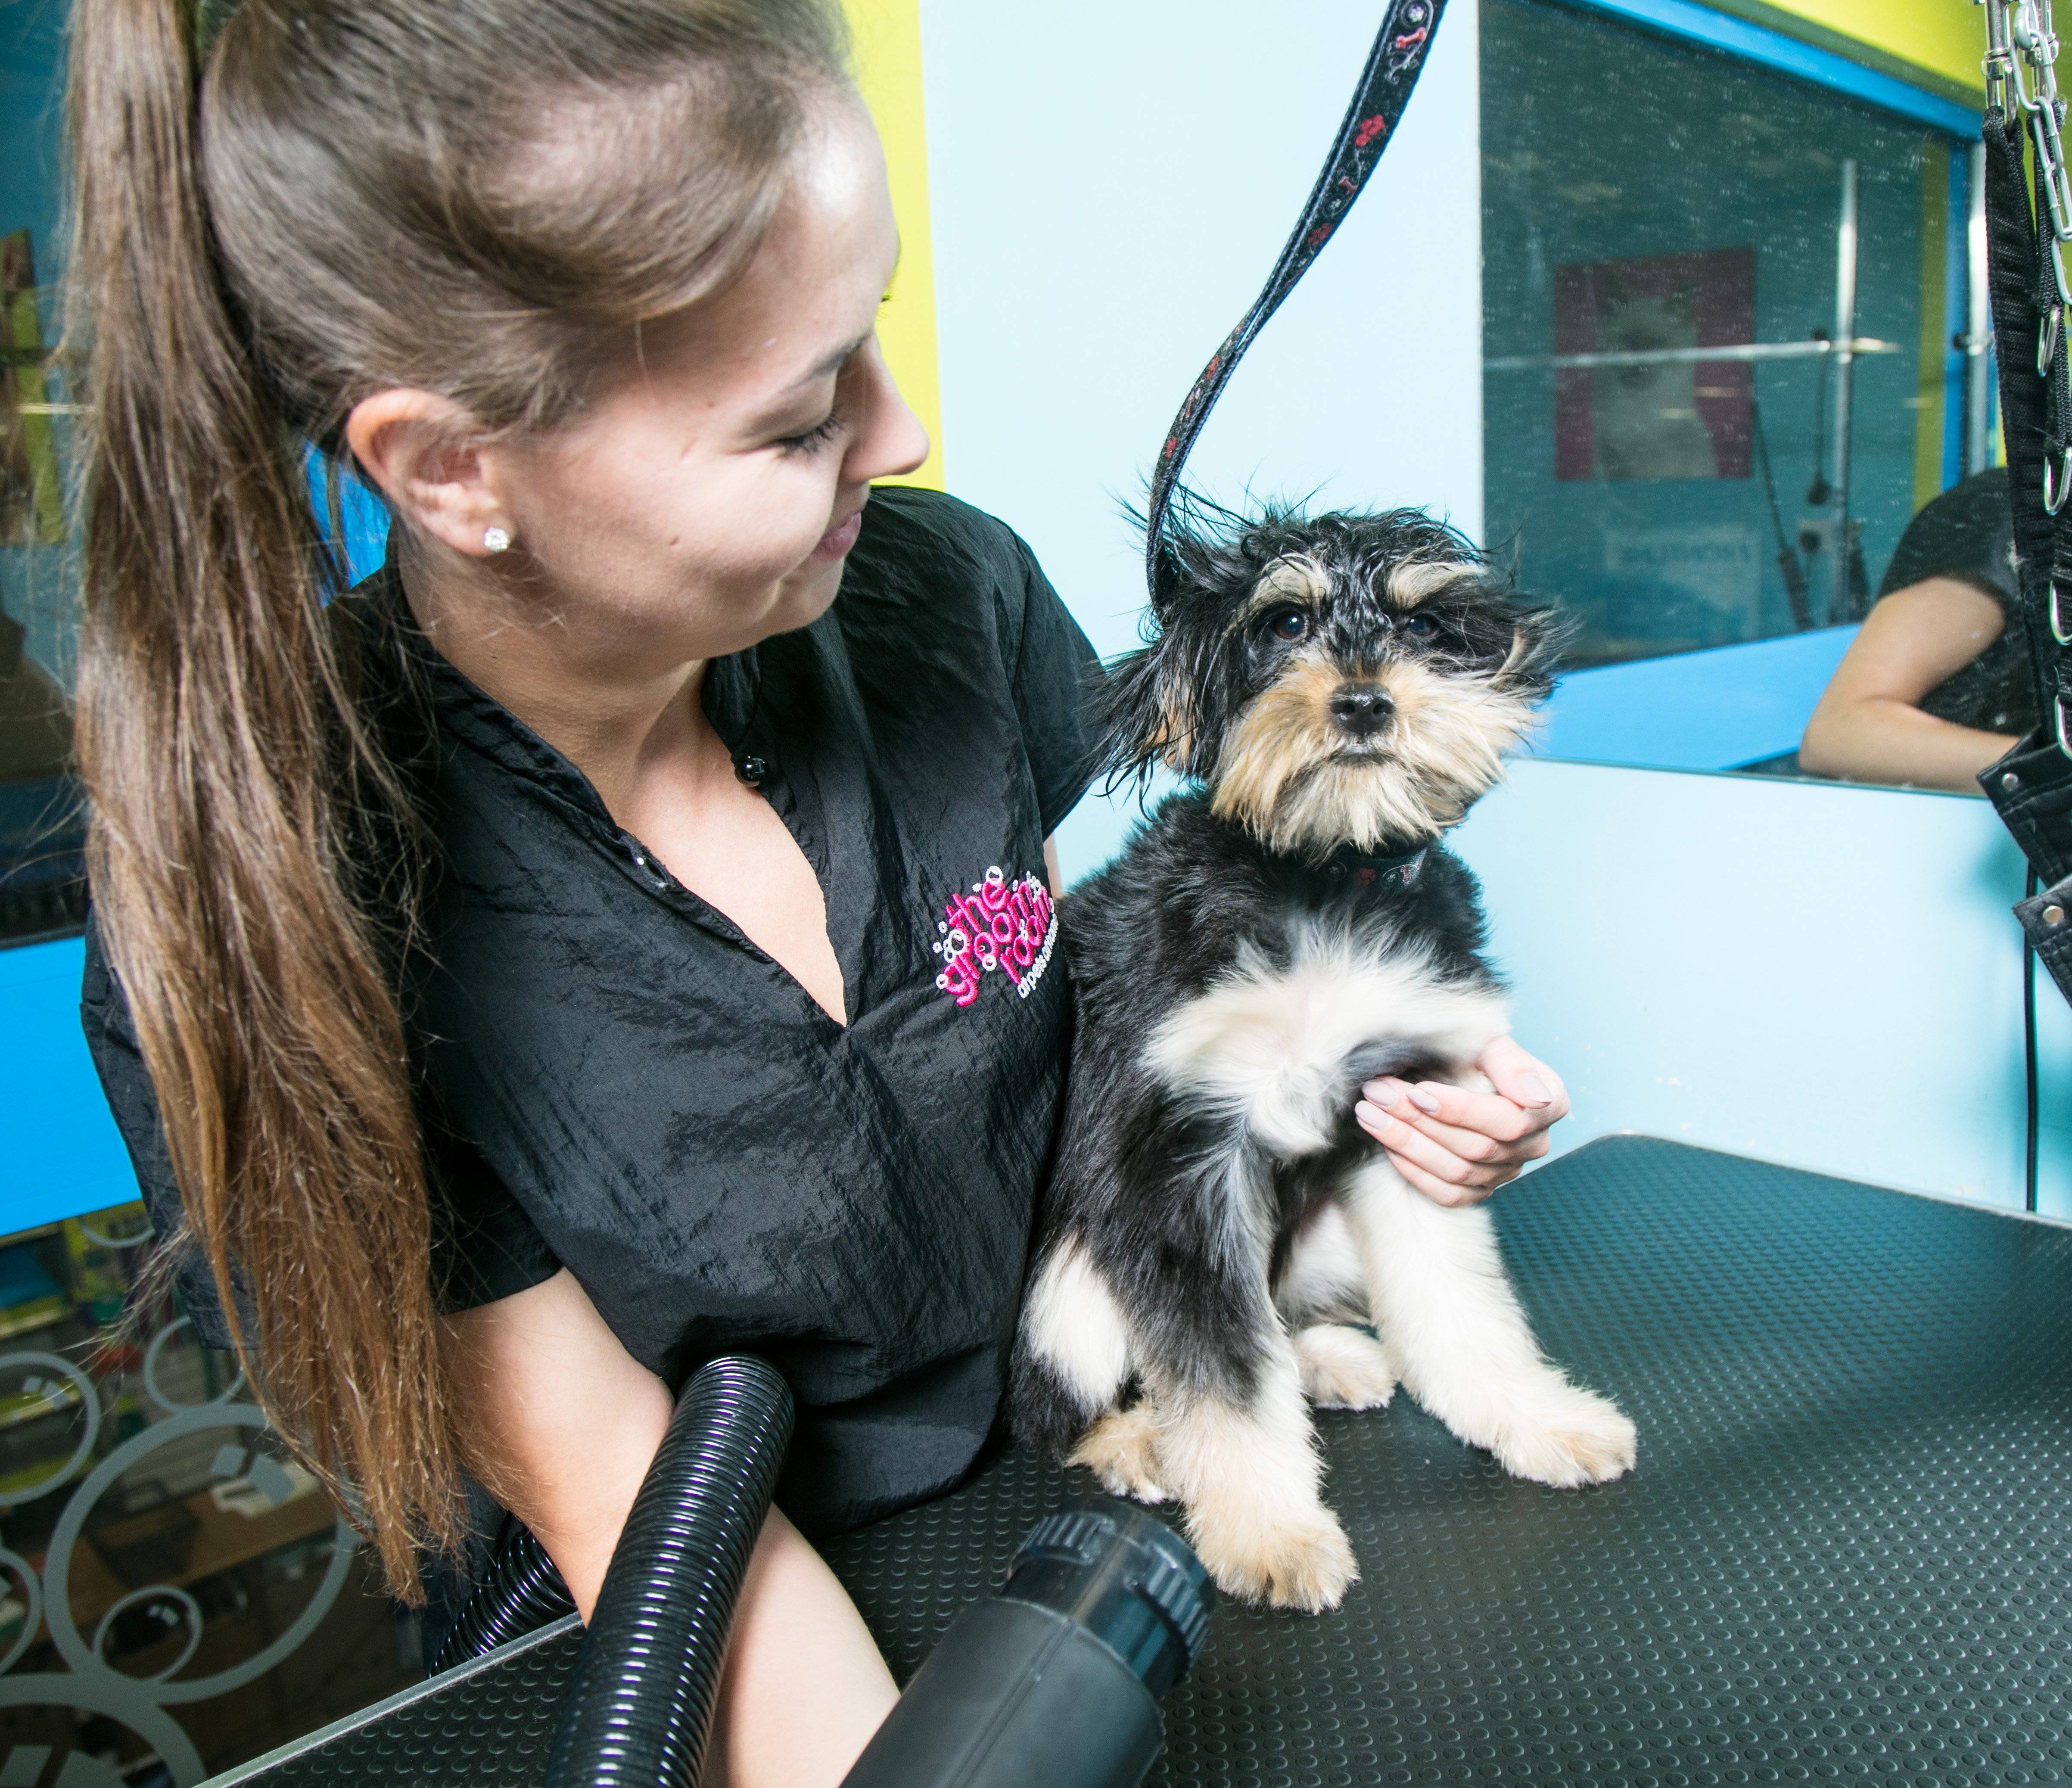 pets at home puppy groom